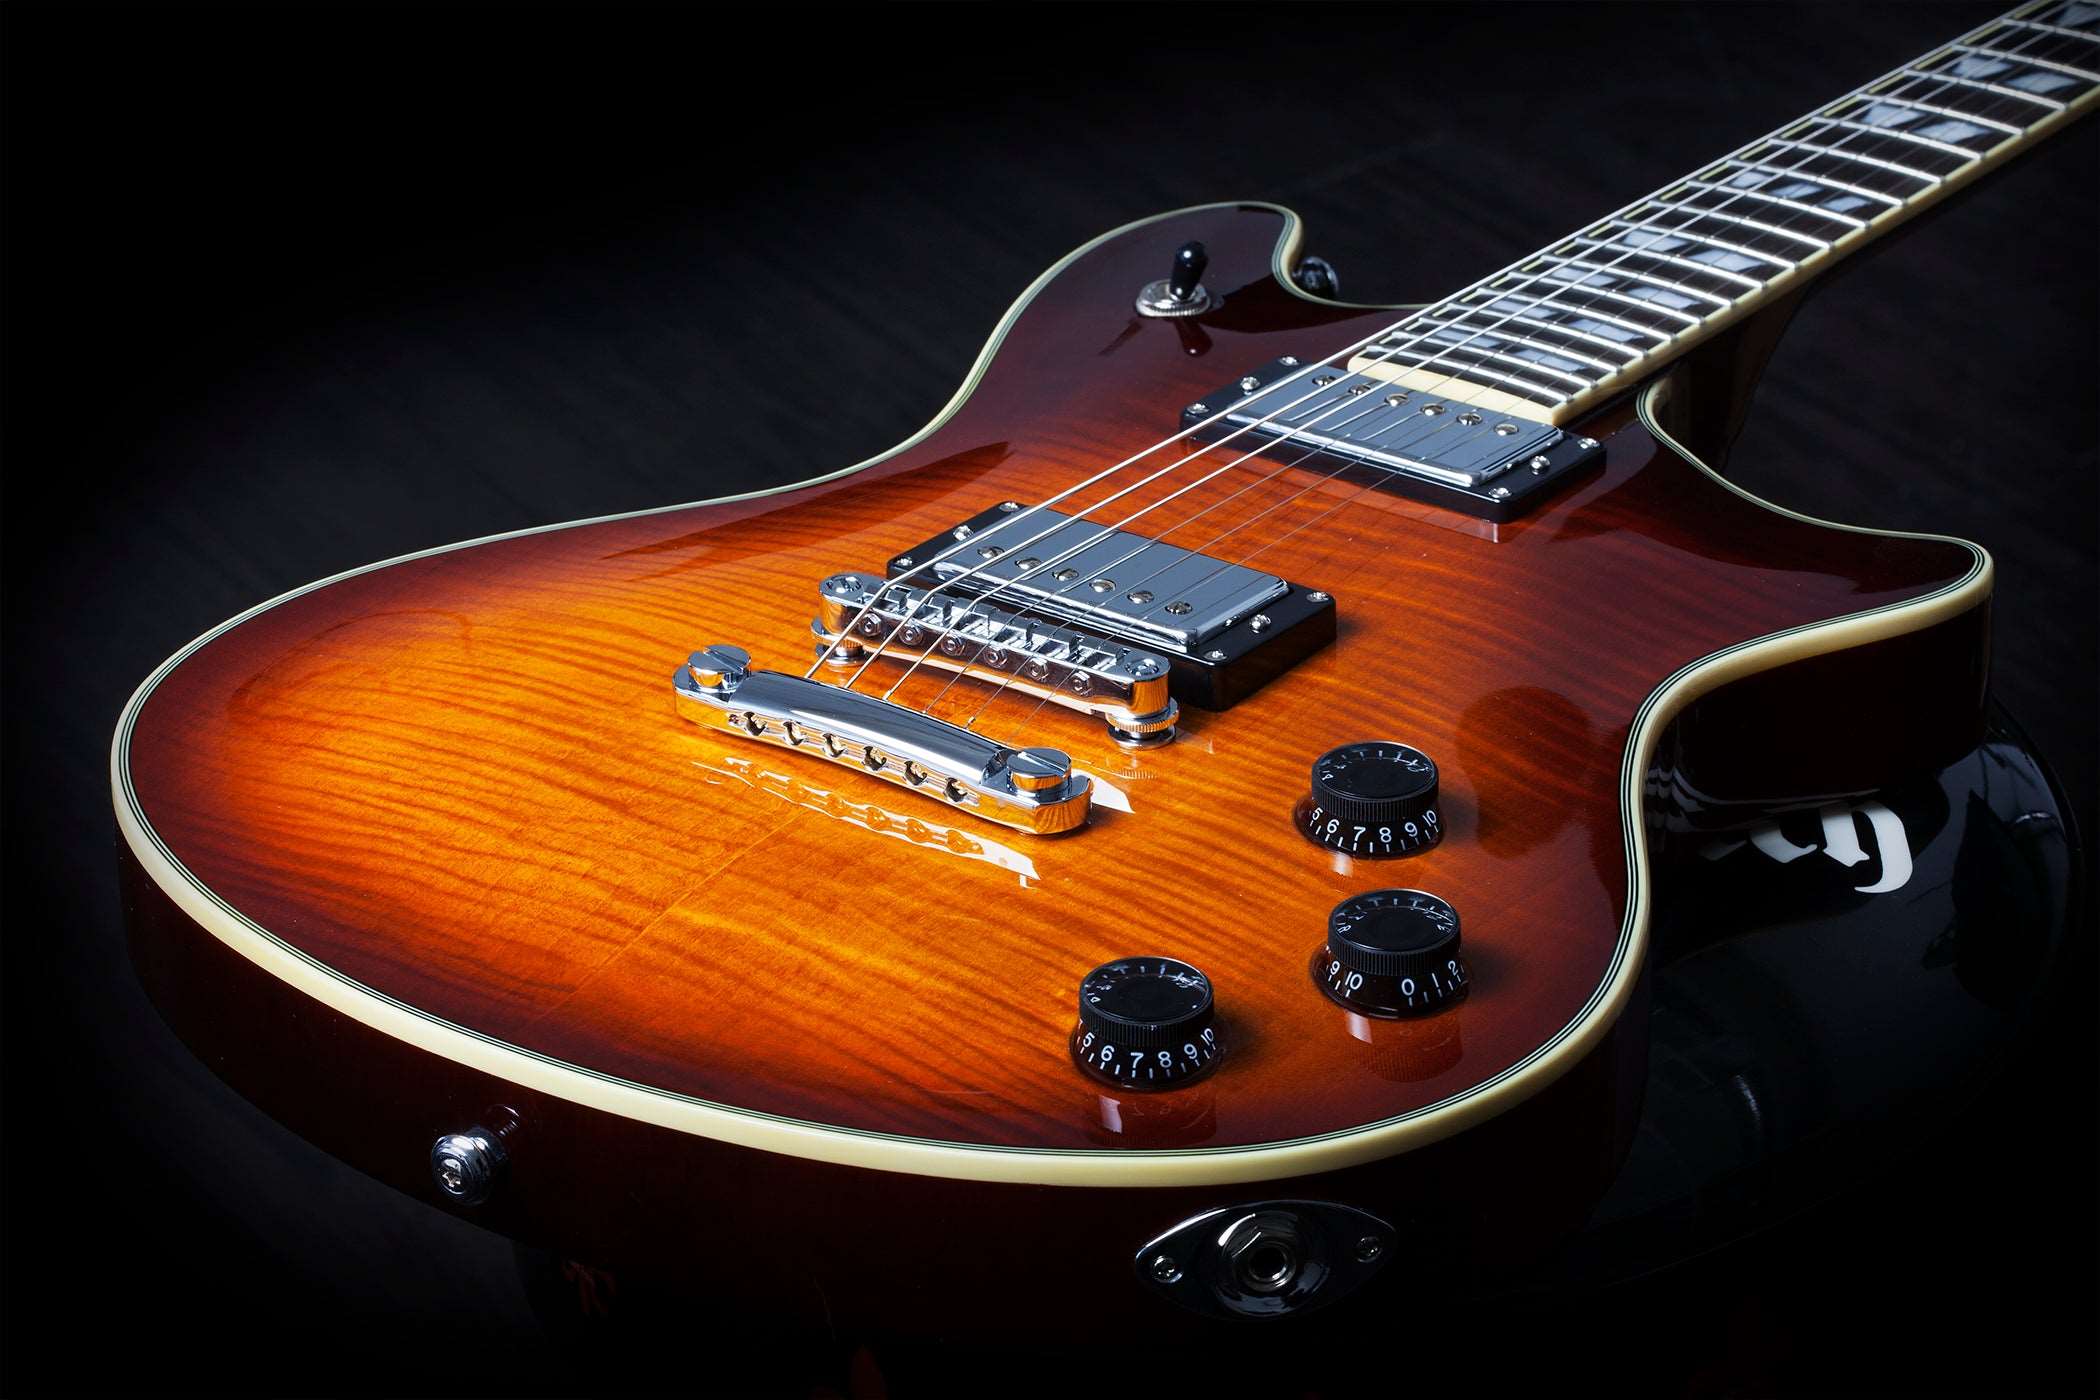 SCHECTER TEMPEST CUSTOM ELECTRIC GUITAR - FADED VINTAGE SUNBURST (1725) MADE IN KOREA, SCHECTER, ELECTRIC GUITAR, schecter-electric-guitar-tempest-custom-fvs, ZOSO MUSIC SDN BHD